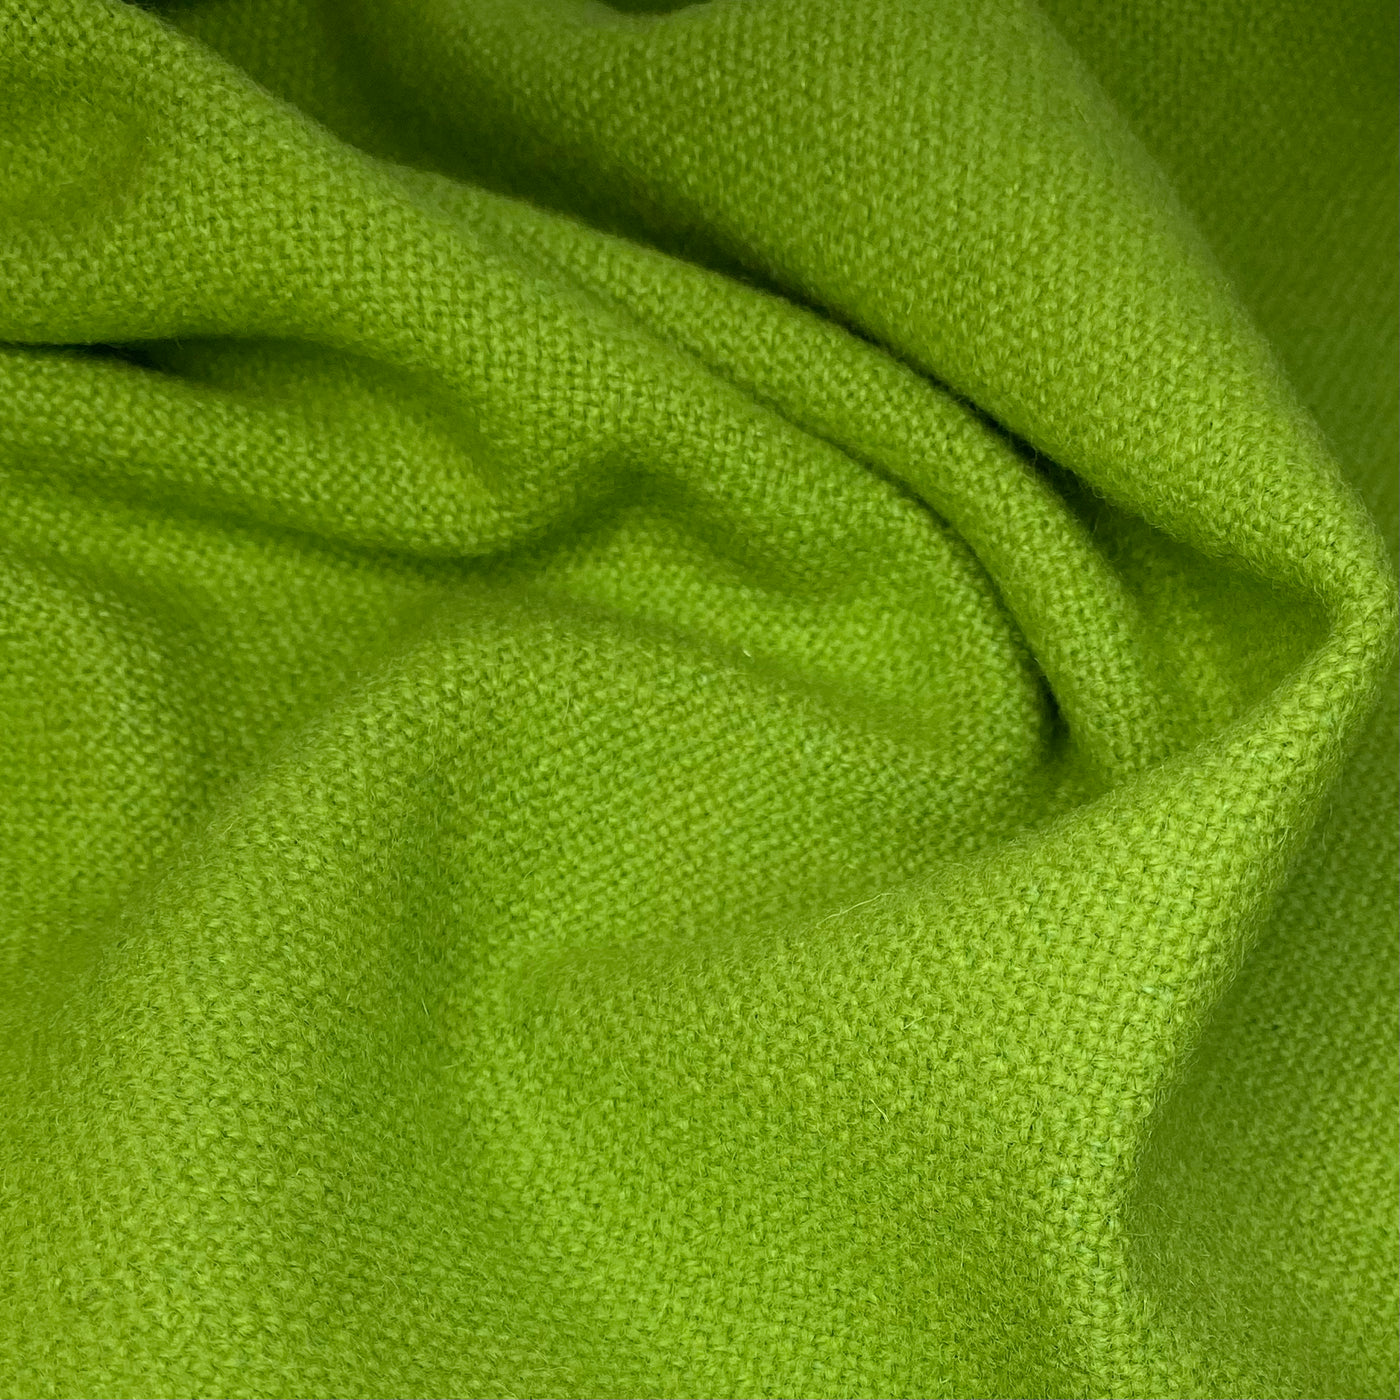 Wool Coating - Remnant - Lime